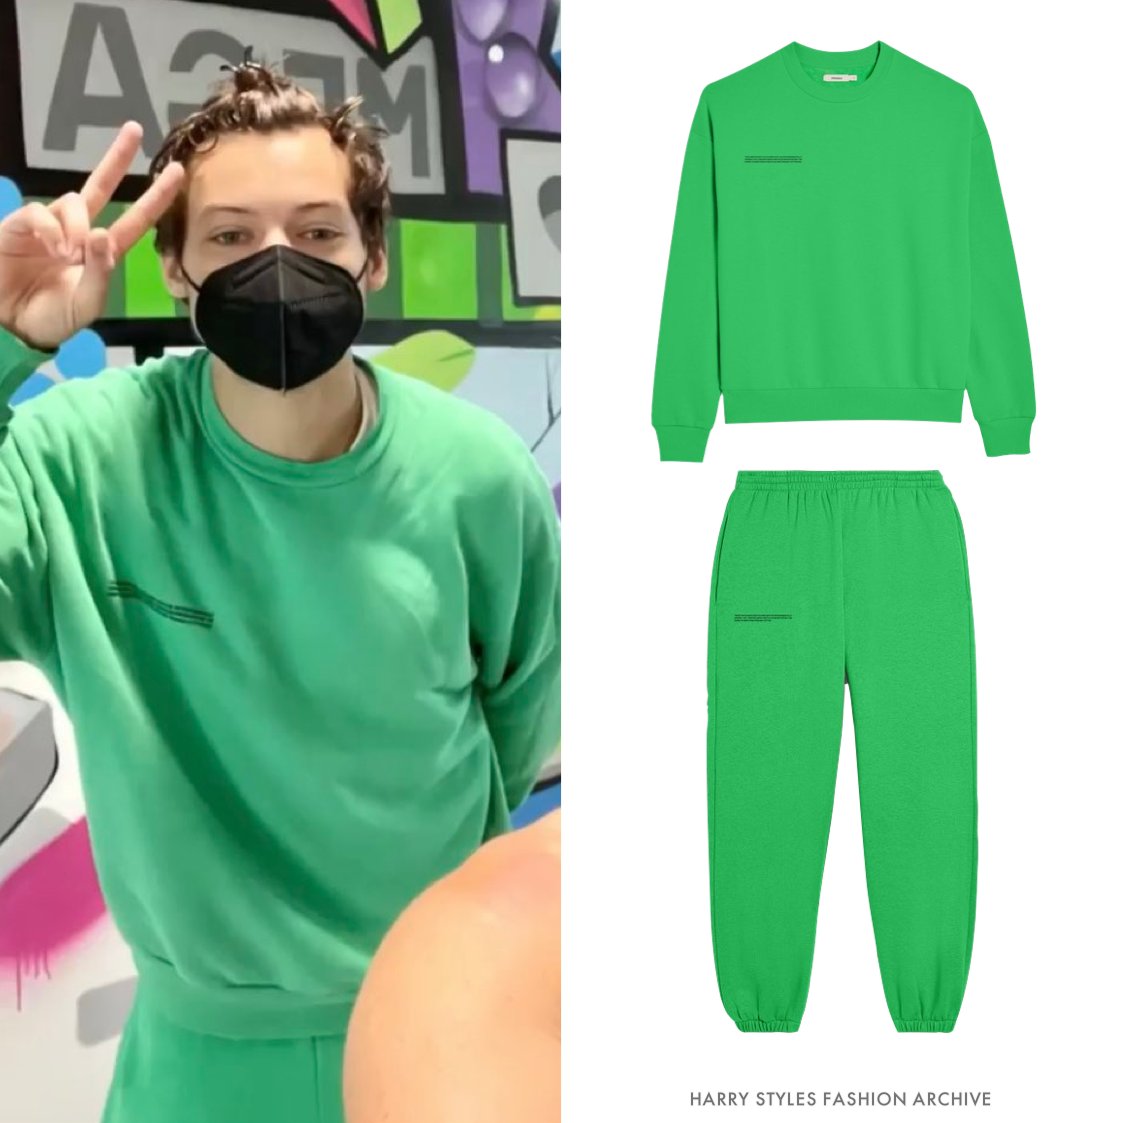 Harry Styles Fashion Archive on X: Harry wore these sweatpants in the 'As  It Was' behind the scenes video. / X